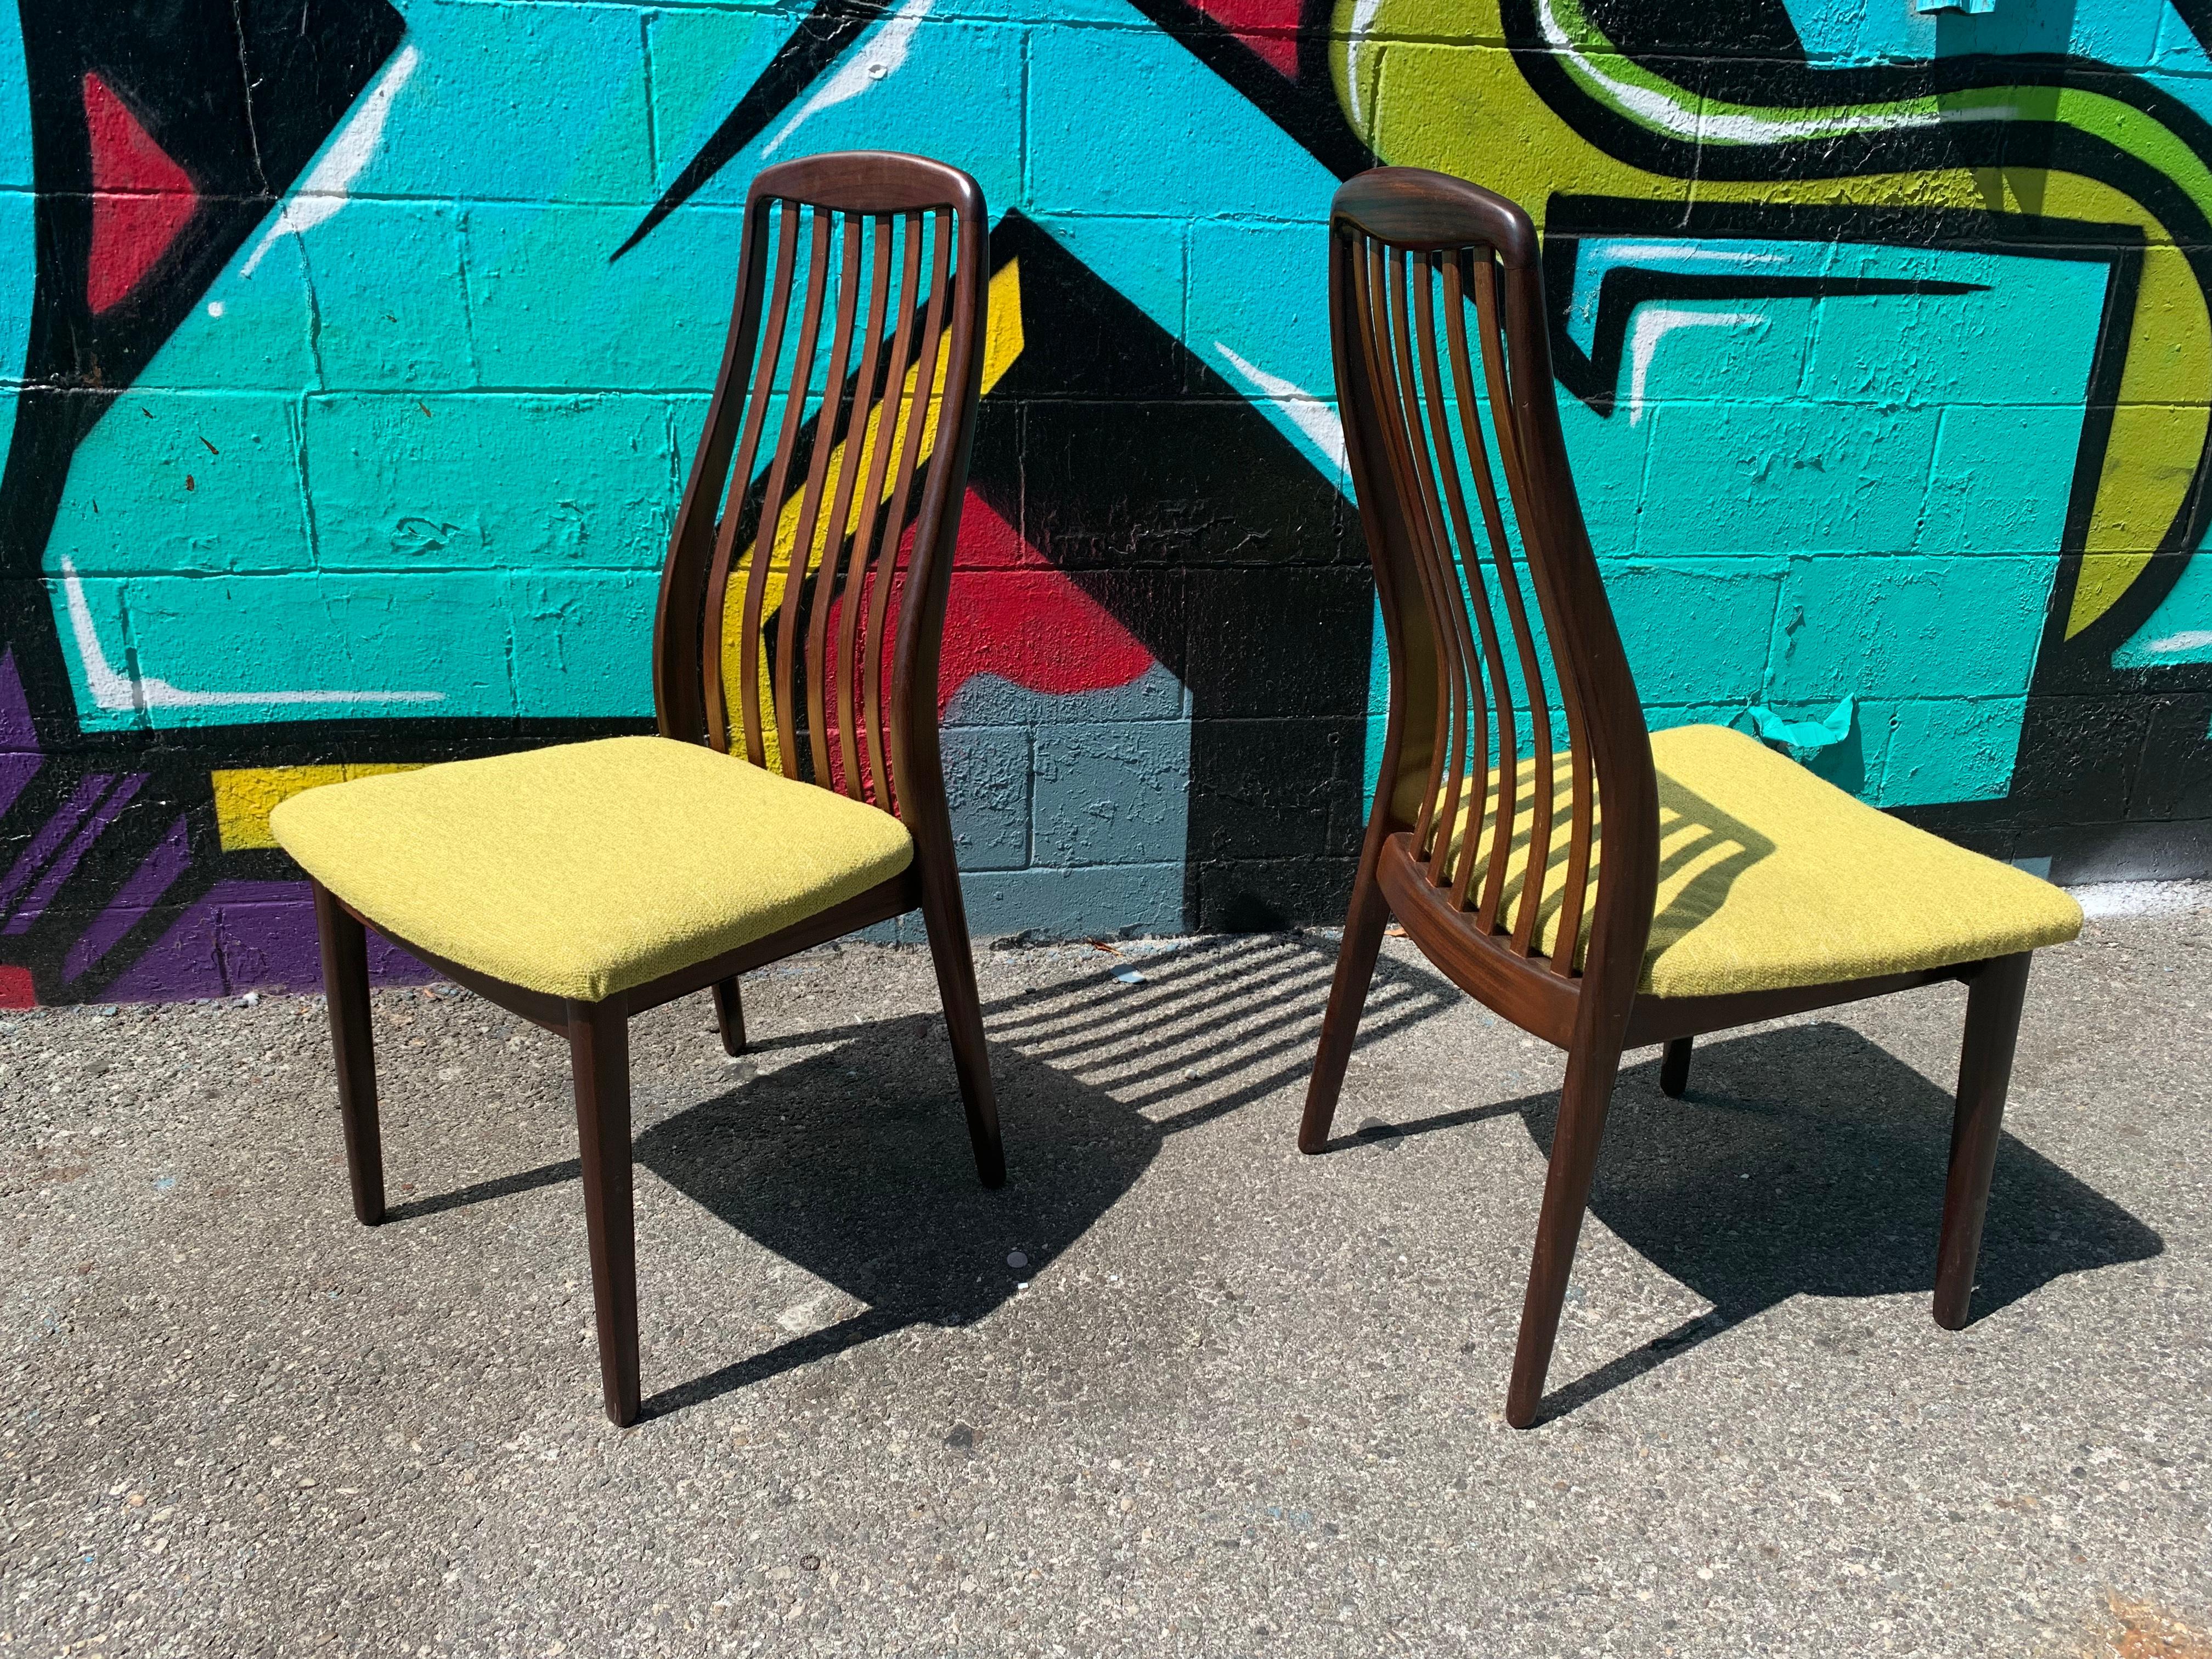 This complete set of dining chairs was manufactured by Dyrlund of Denmark in the 1960s. There are clean lines and nice shape/movement to an otherwise fairly traditional slat-back design.